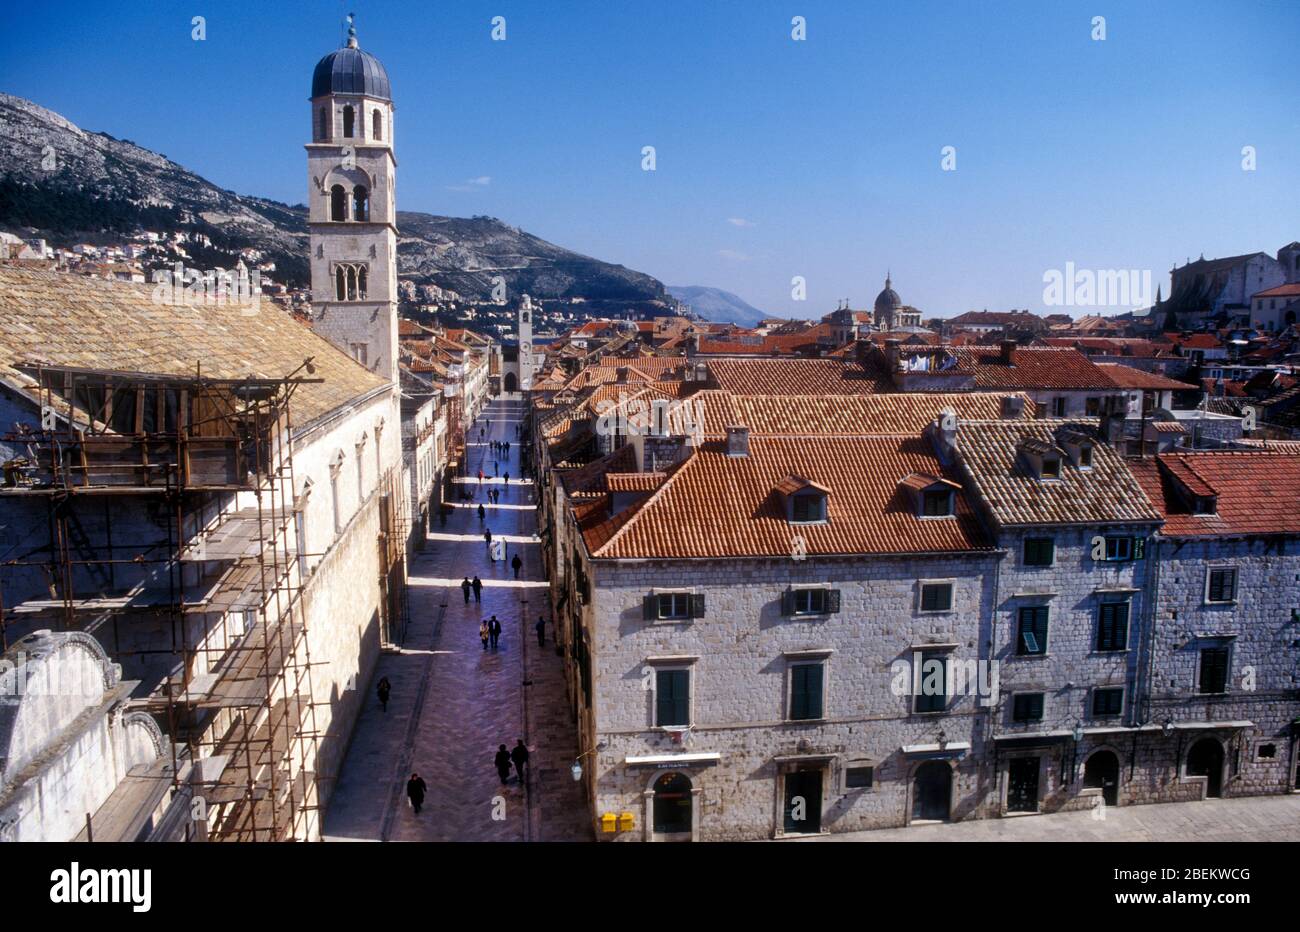 1994 Dubrovnik, Croatia - bomb damaged church in the historic town pictured during a lull in bombings by the Serbian military Stock Photo